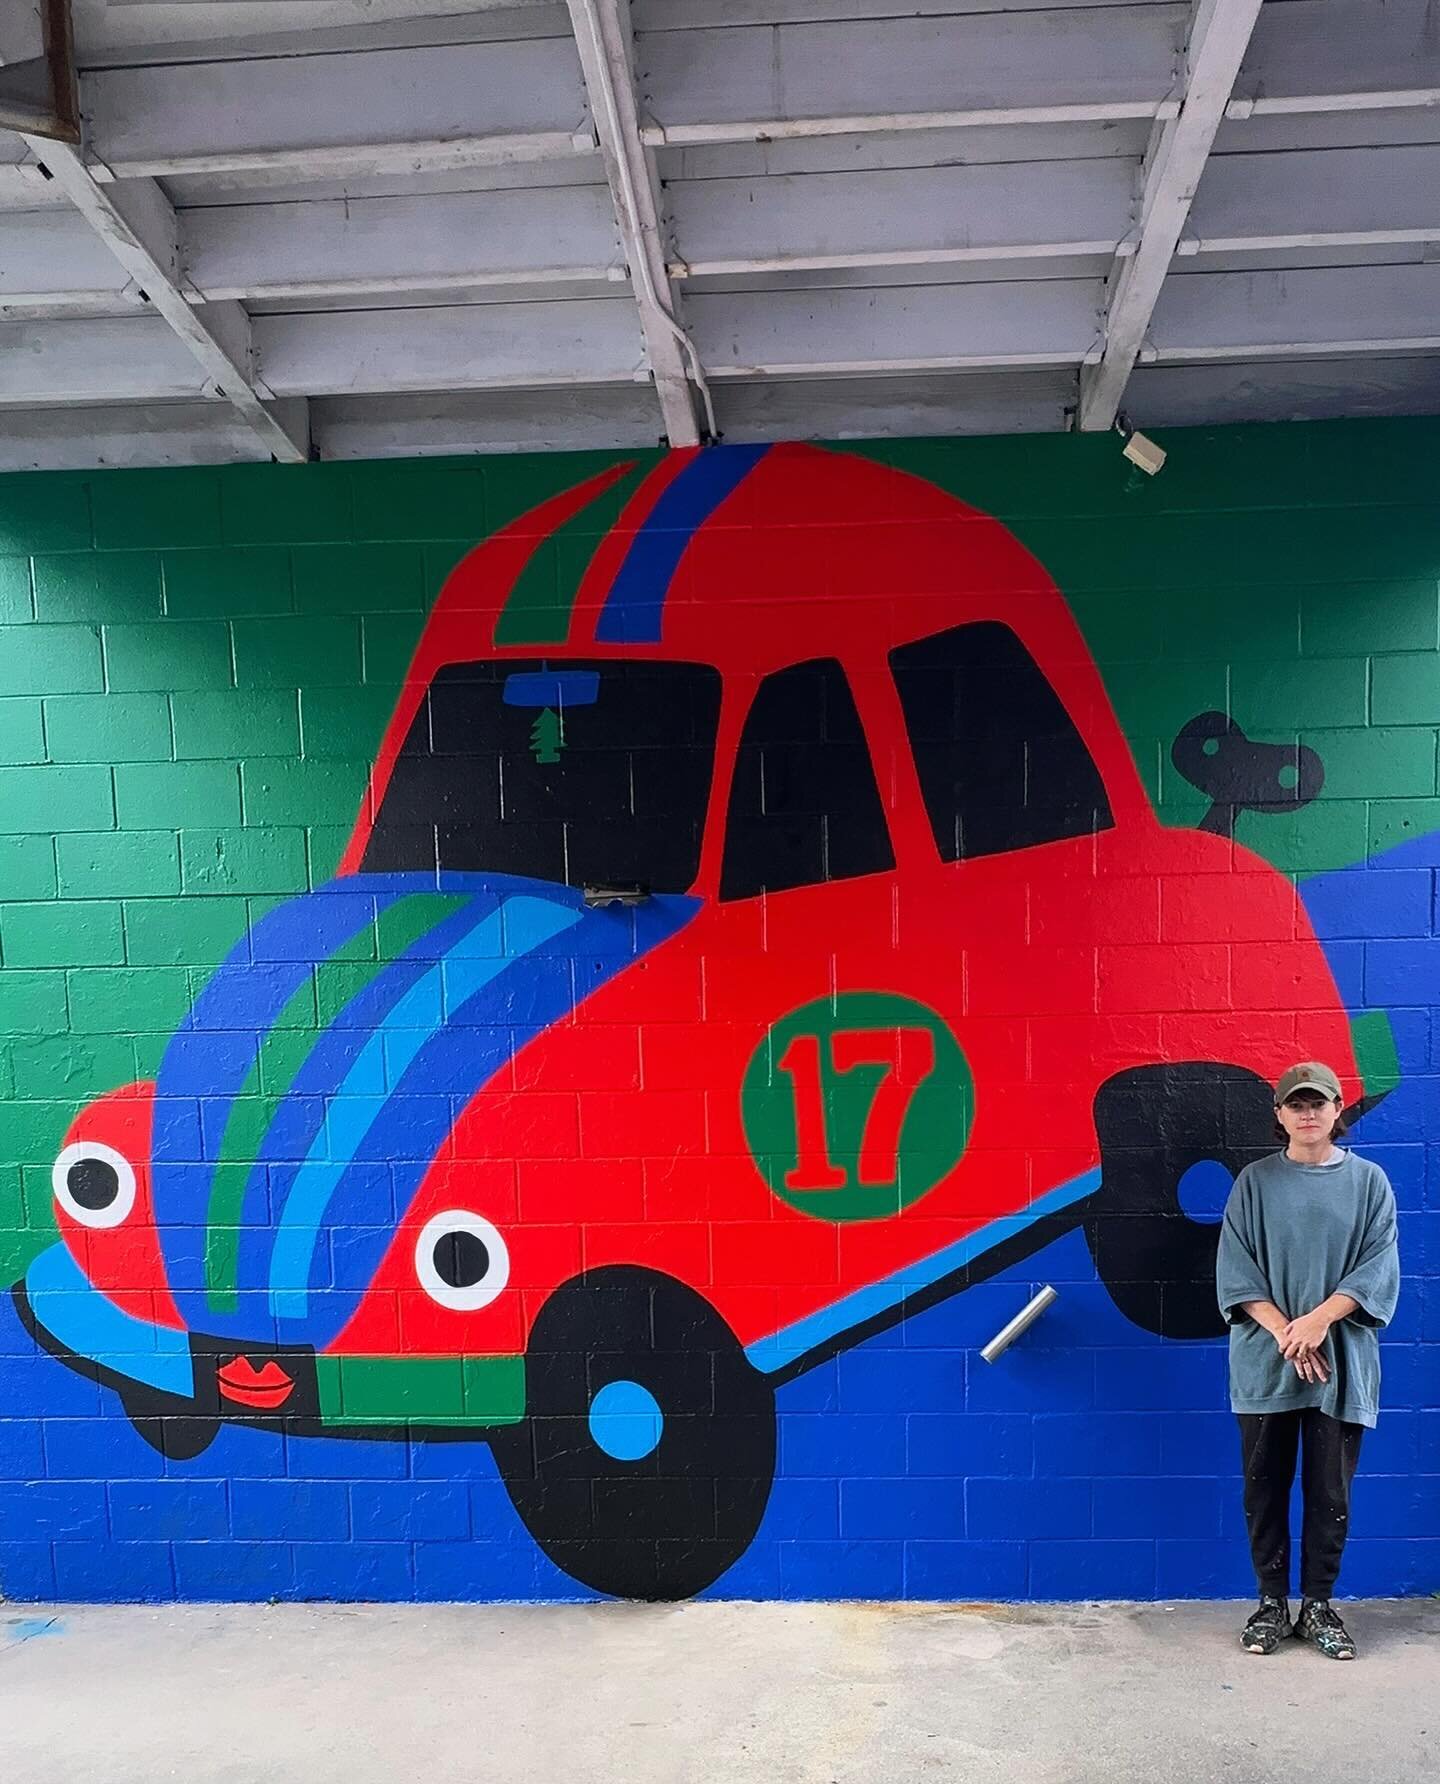 Makin some new carwash murals w my bestie @davidhowler This slug bug is not only fast af but it can also pitch AND HIT

#blessed 
#homerun #slamdunk #shohei #17 #doyers 
#mural #lamural #streetart #streetarteverywhere #ily